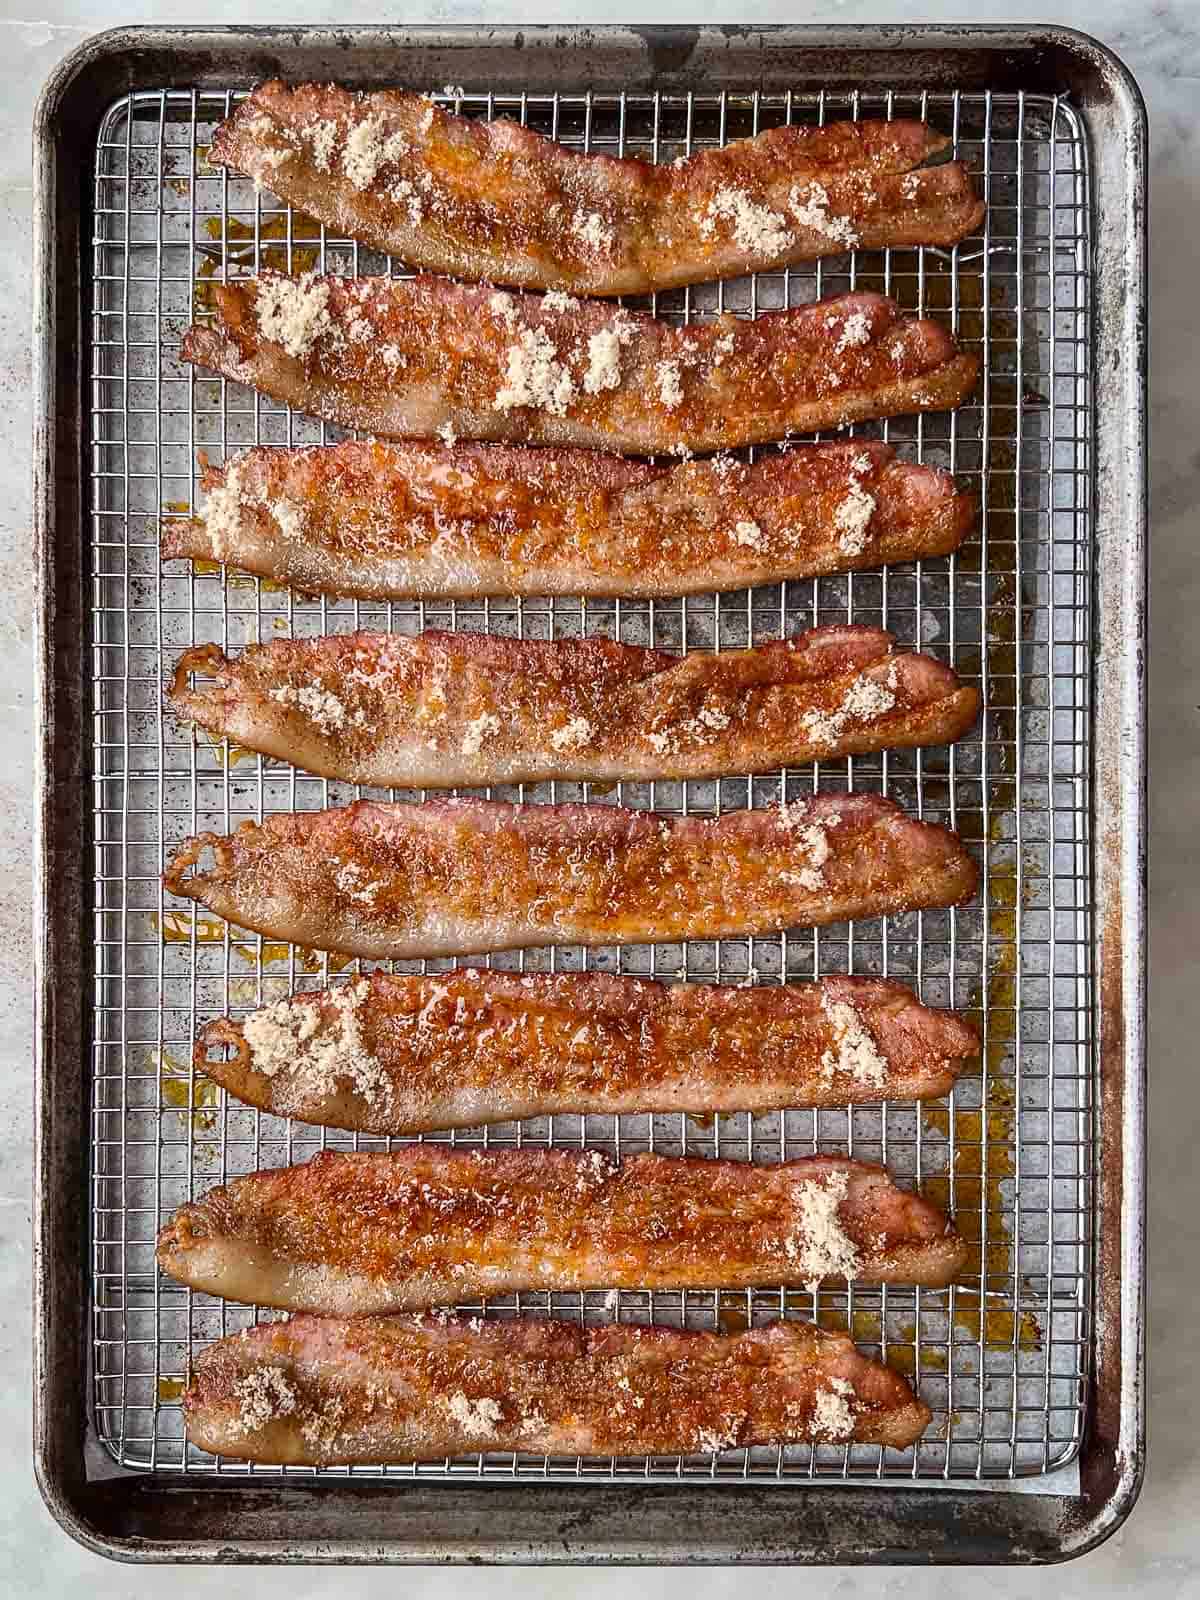 Slices of half cooked candied bacon sprinkled with brown sugar on a backing rack.